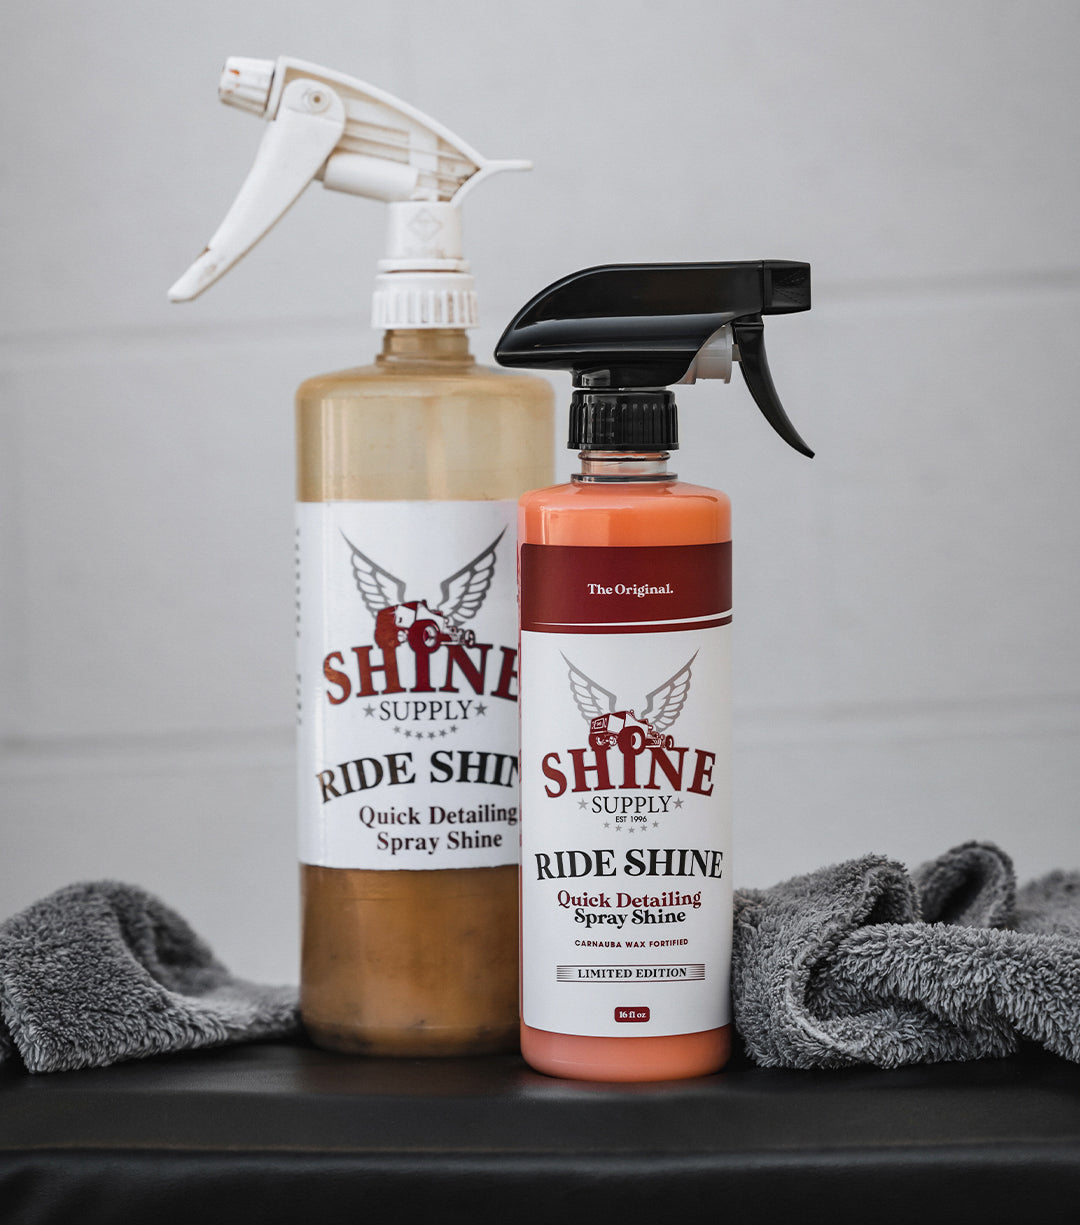 Quick Shine Instant Spray Coating – Walt's Polish– The Leader in Auto  Detailing Supplies